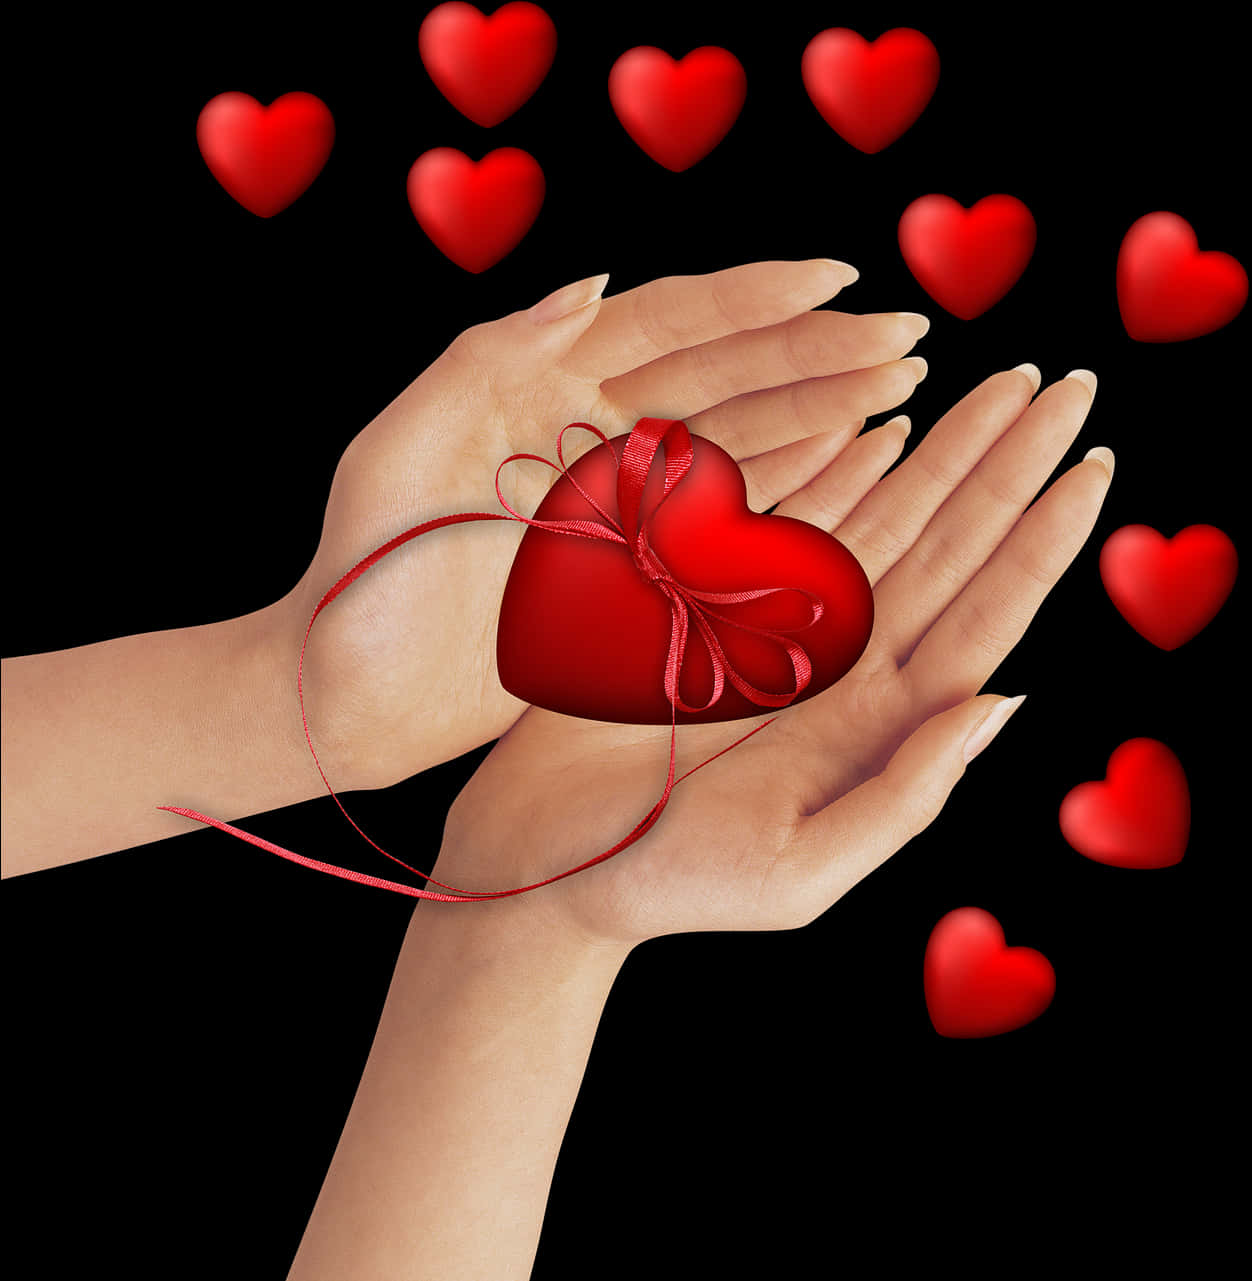 Red Heart Giftin Hands Transparent Background PNG